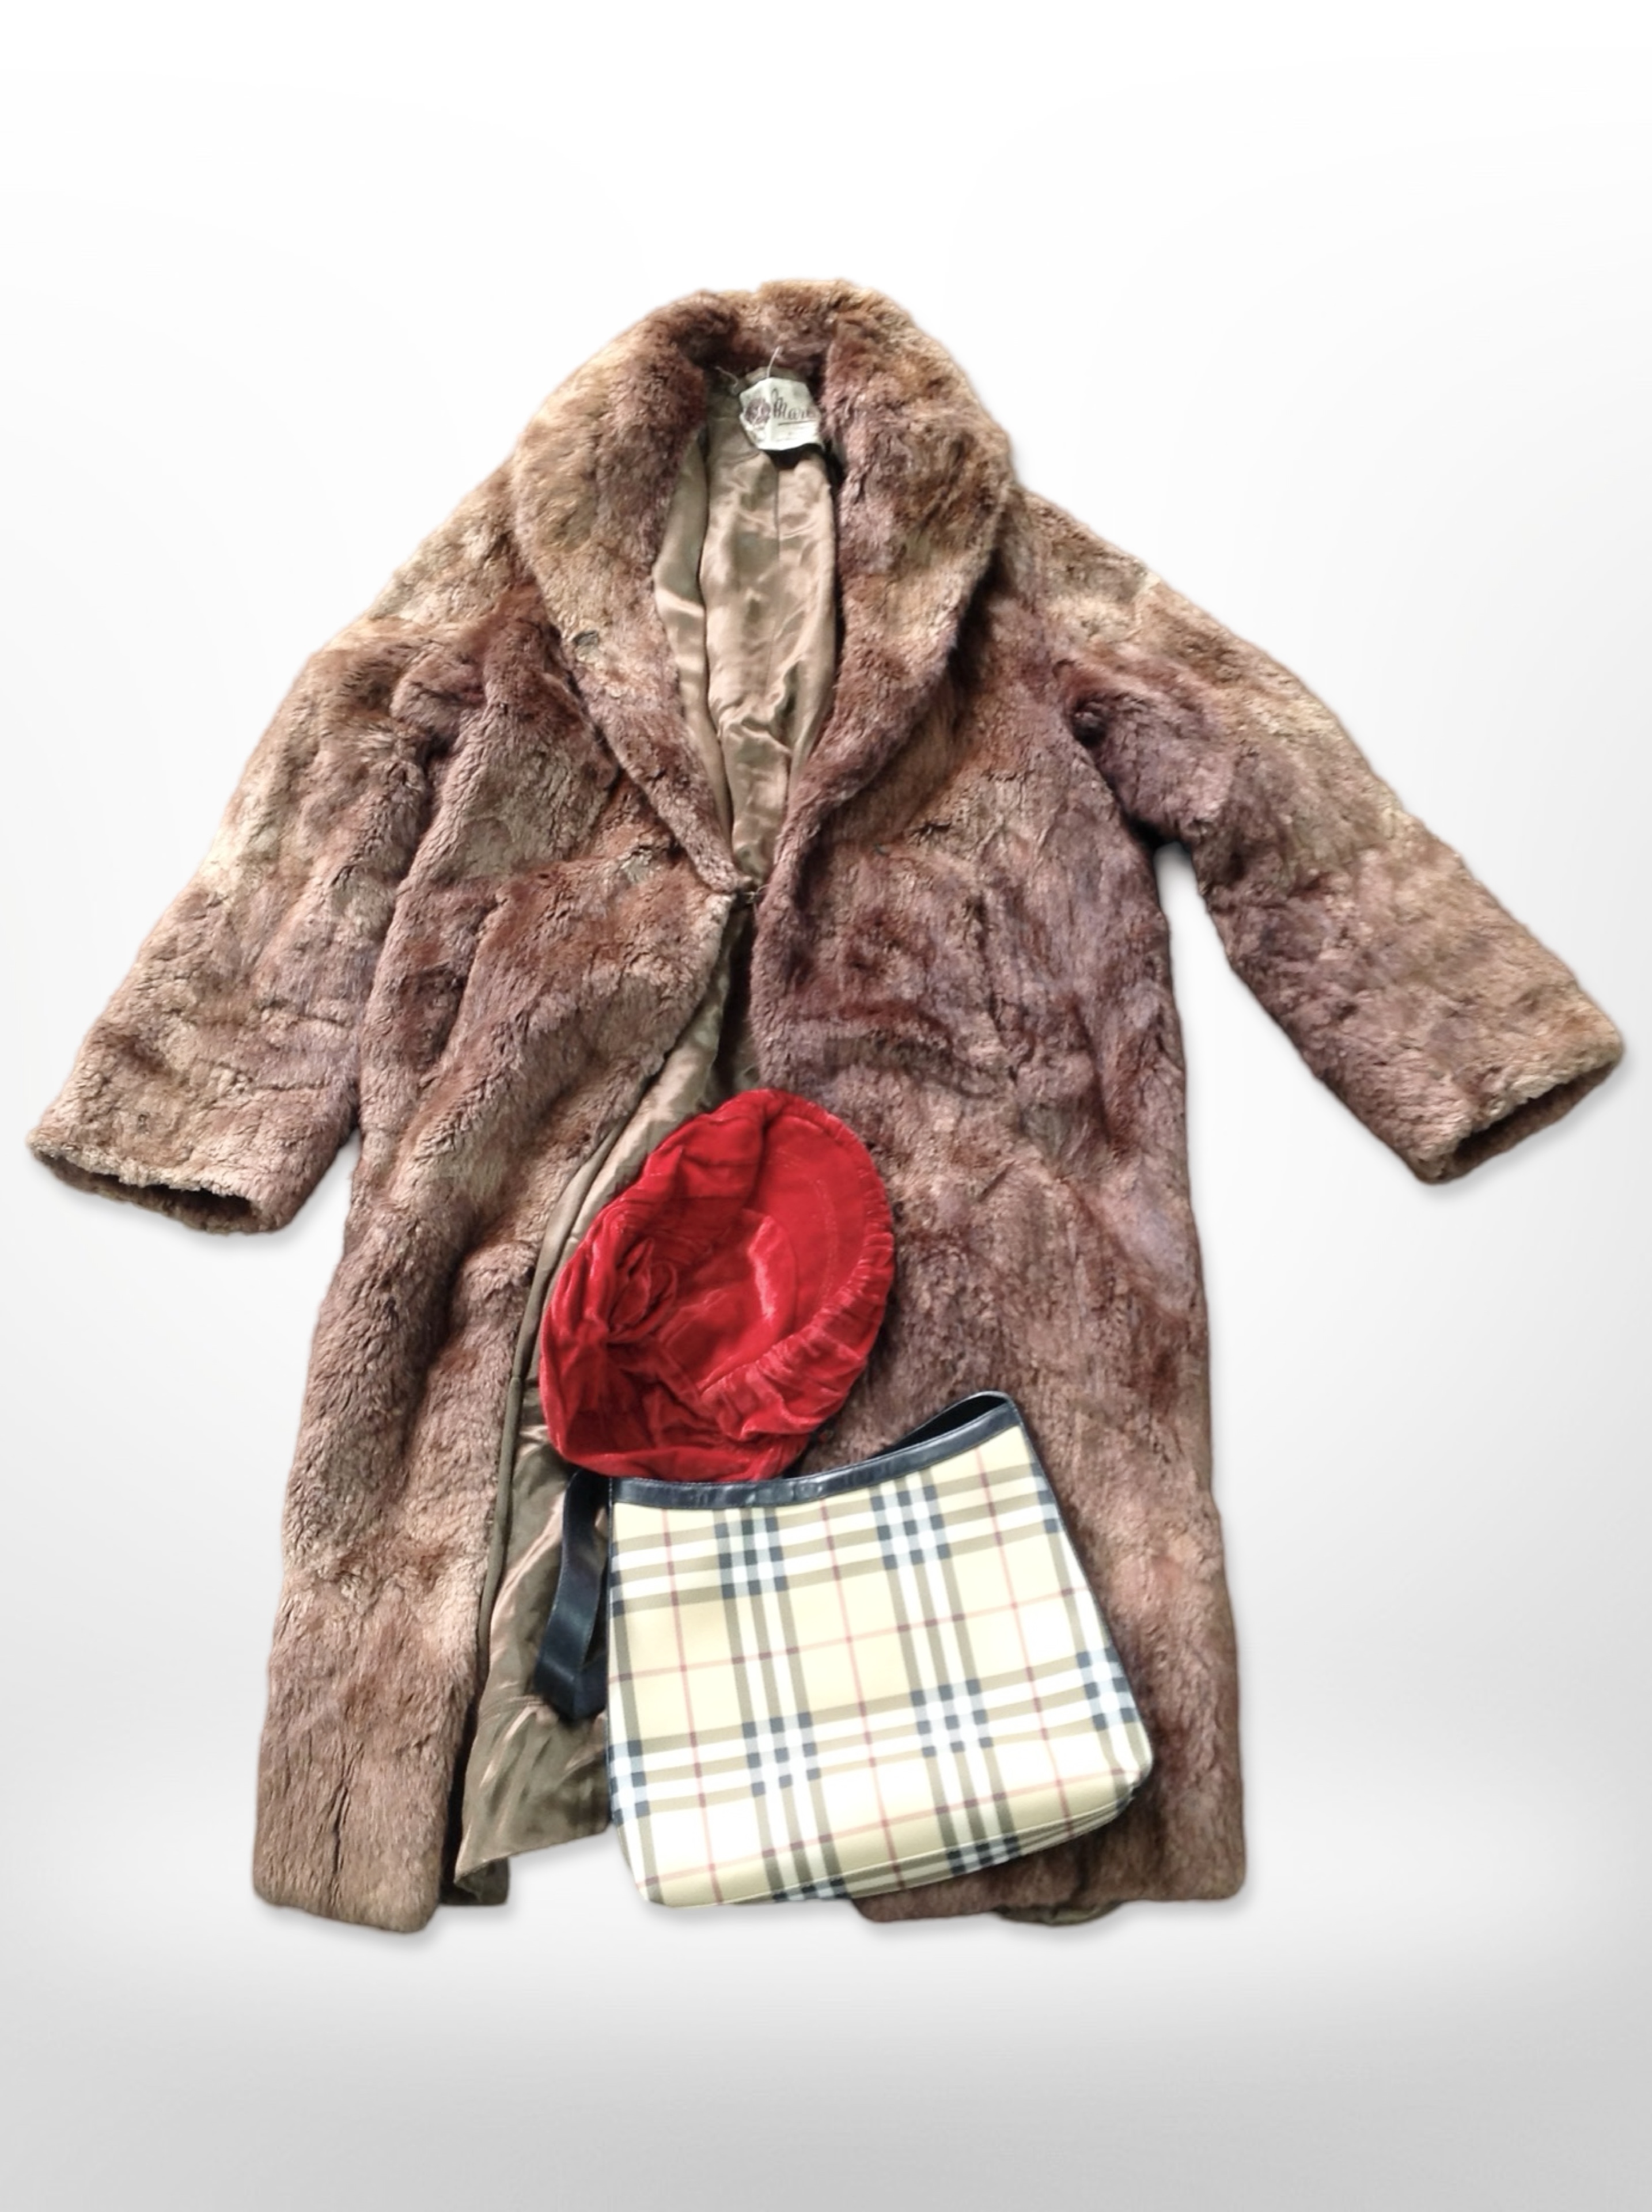 A lady's three quarter length mink fur coat by Marcus together with Burberry shoulder bag